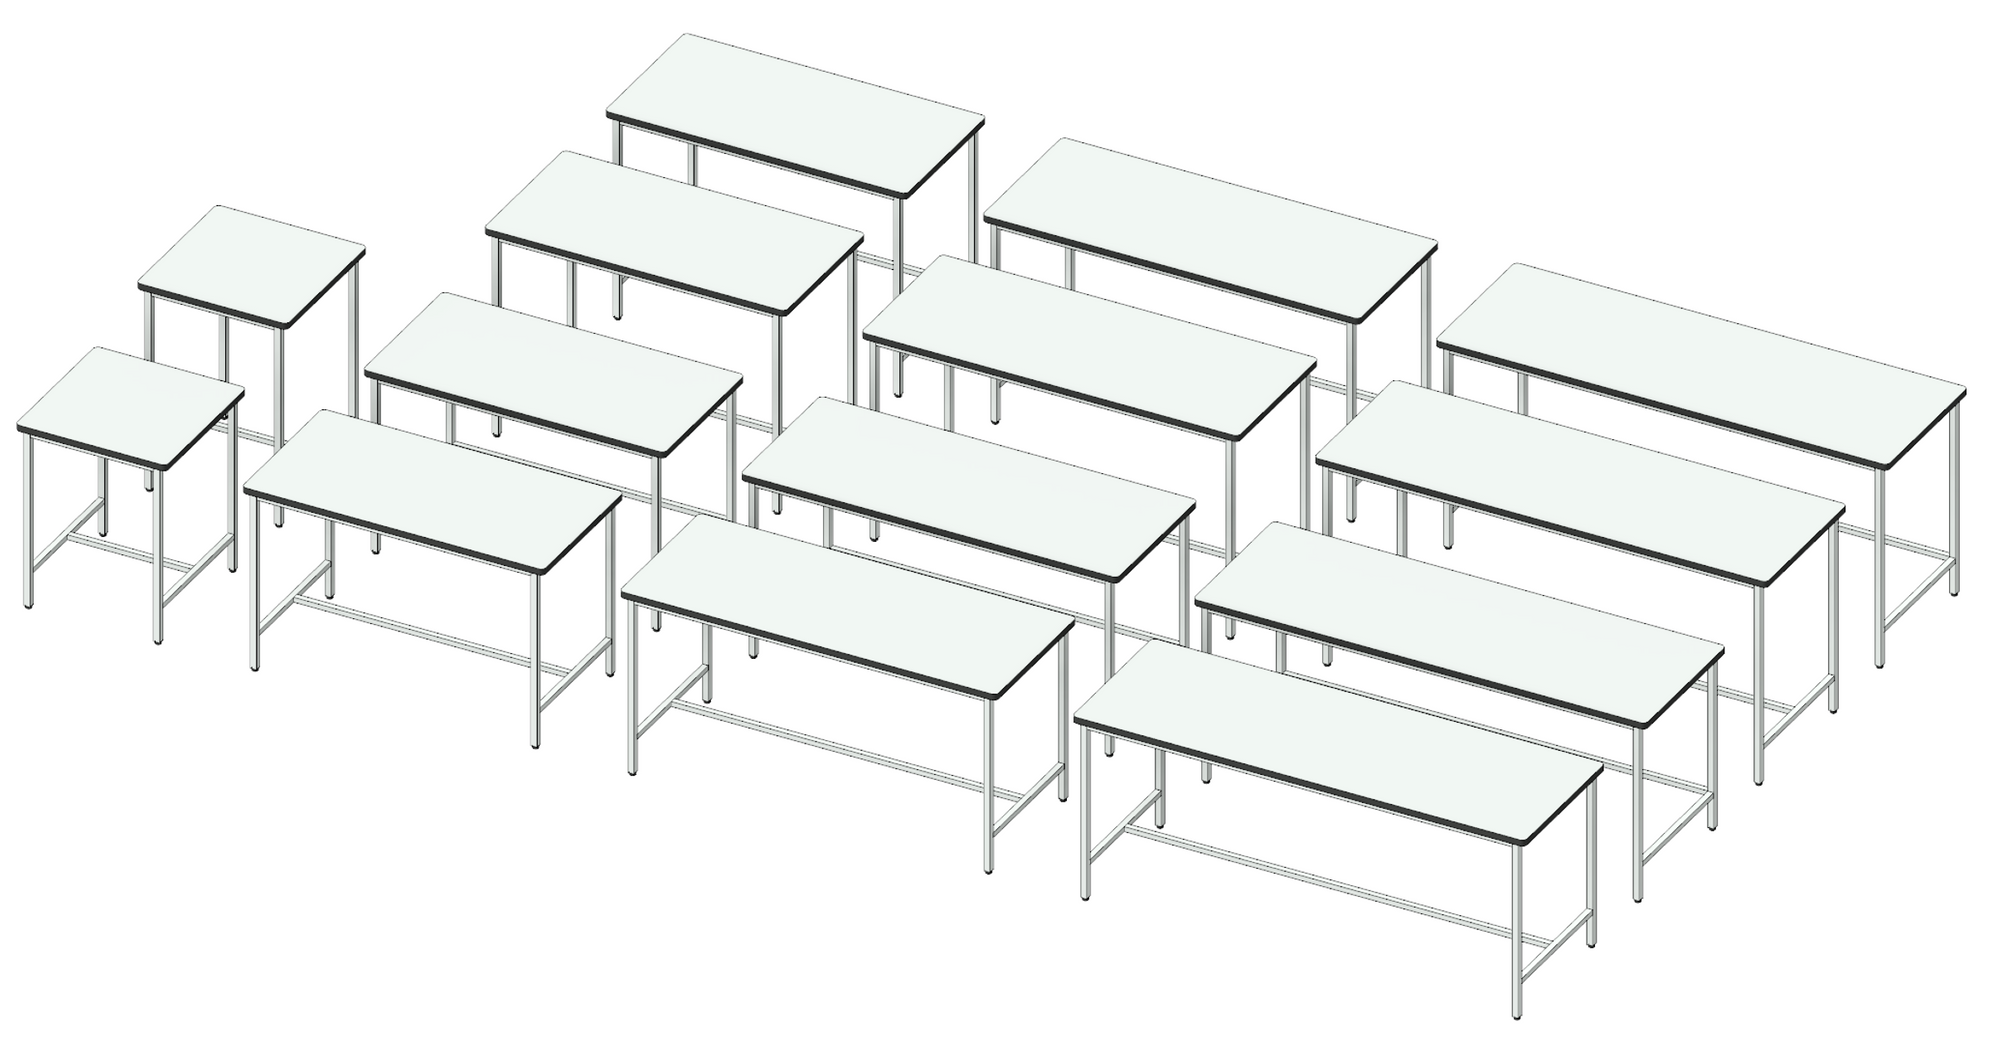 3D image showing white table top variations for H-frame table Revit family.